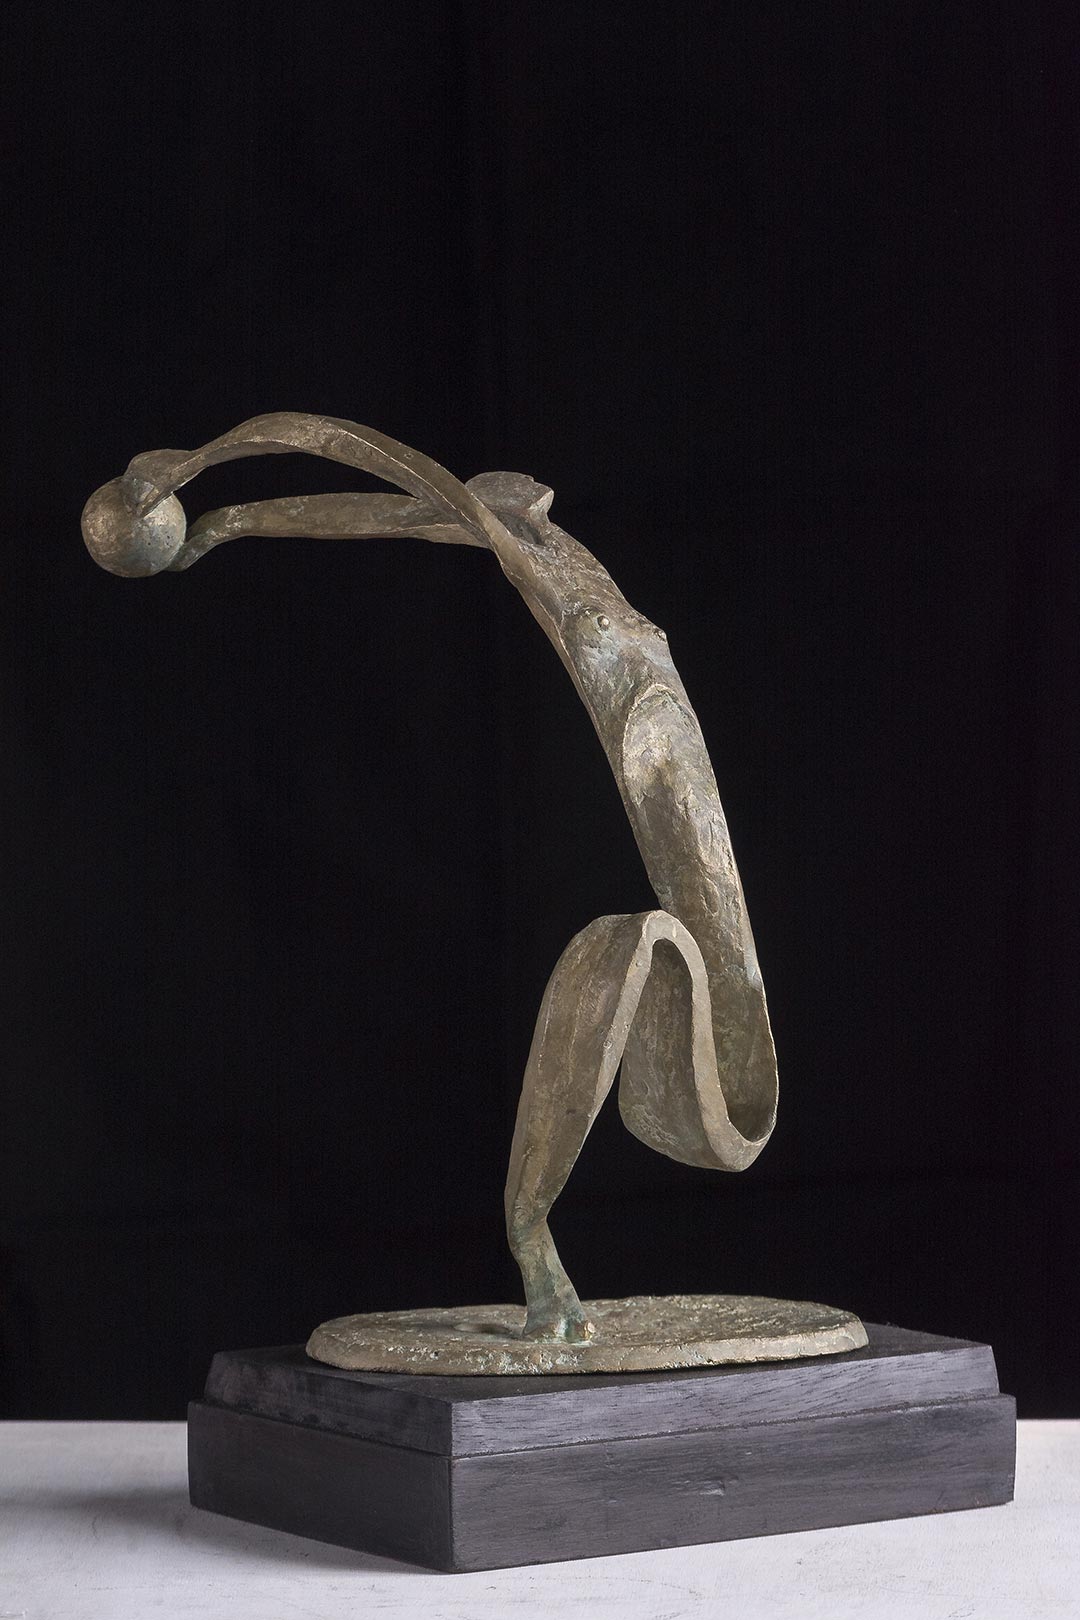 Figurative Sculpture with Bronze"Just Save" art by Prabir Roy